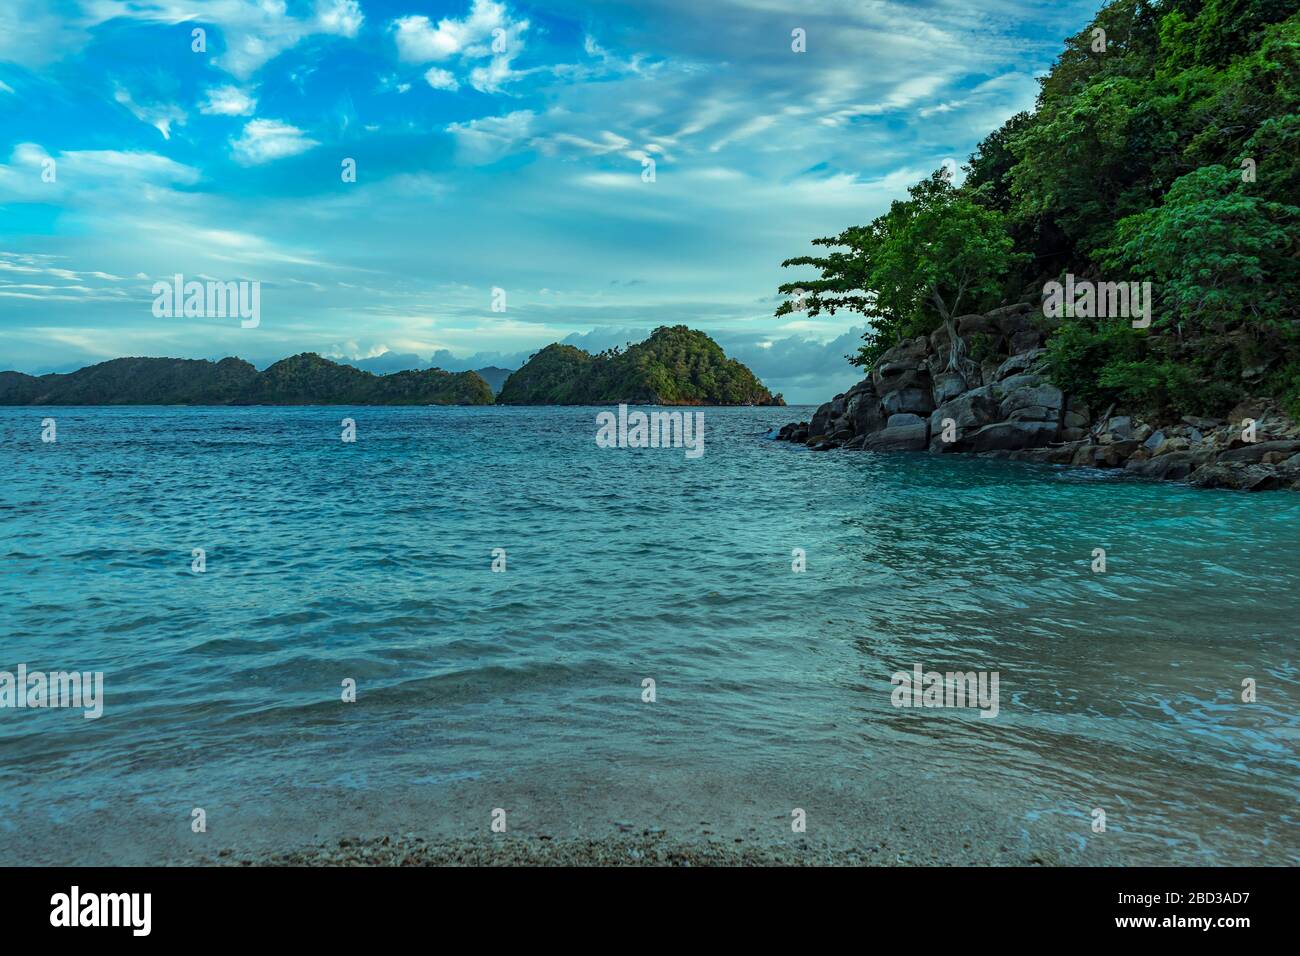 Undiscovered remote beach good for camping or swimming or just enjoying nature near Banda Aceh, Sumatra, Indonesia Stock Photo